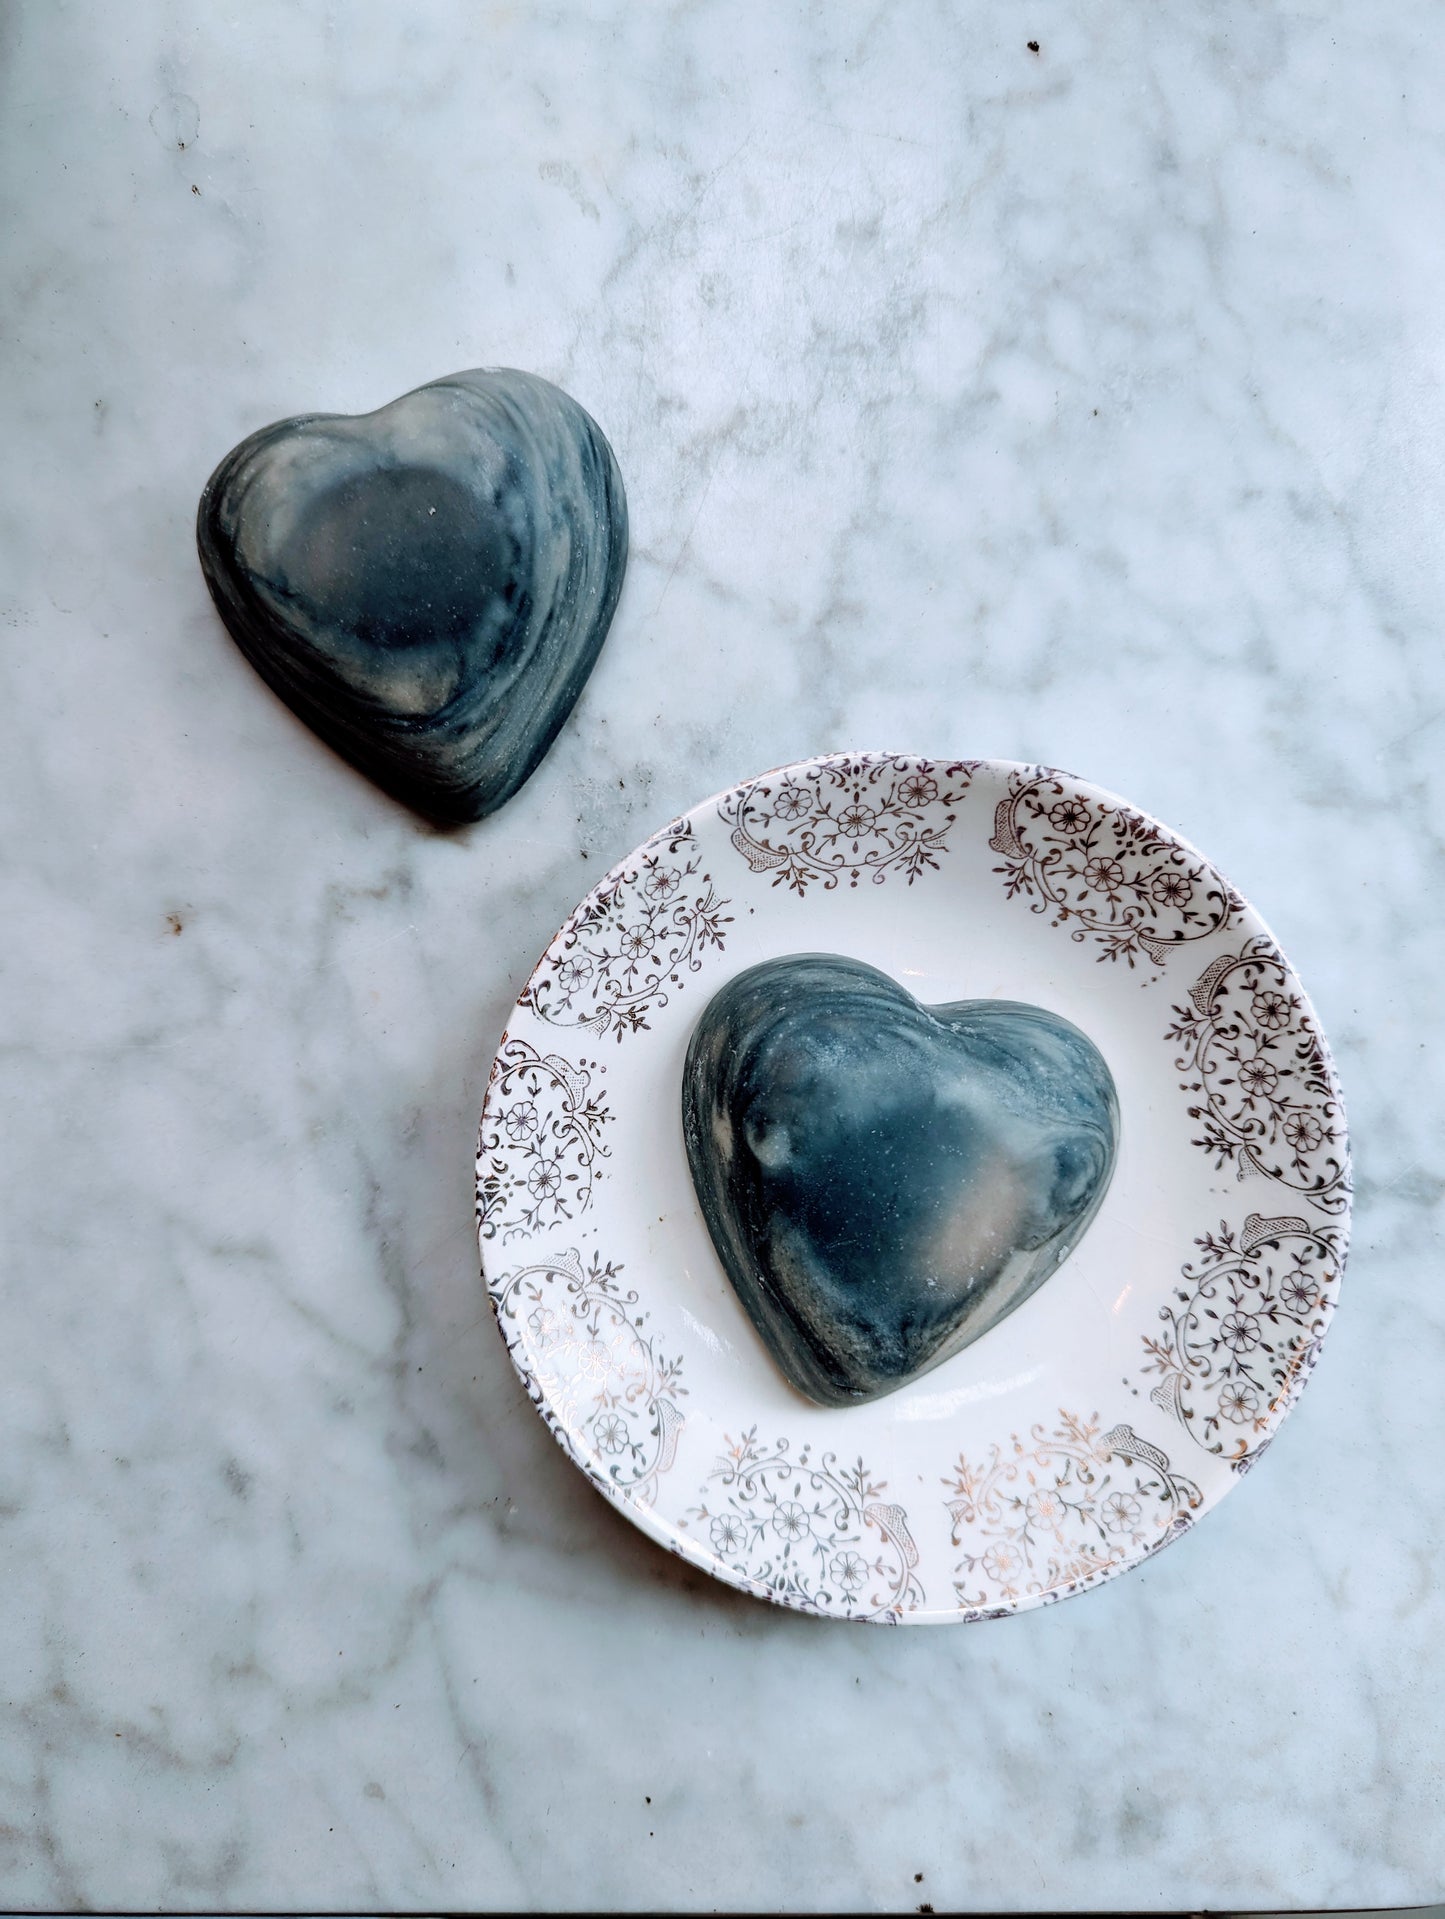 Heart Shaped Soap - Down Under